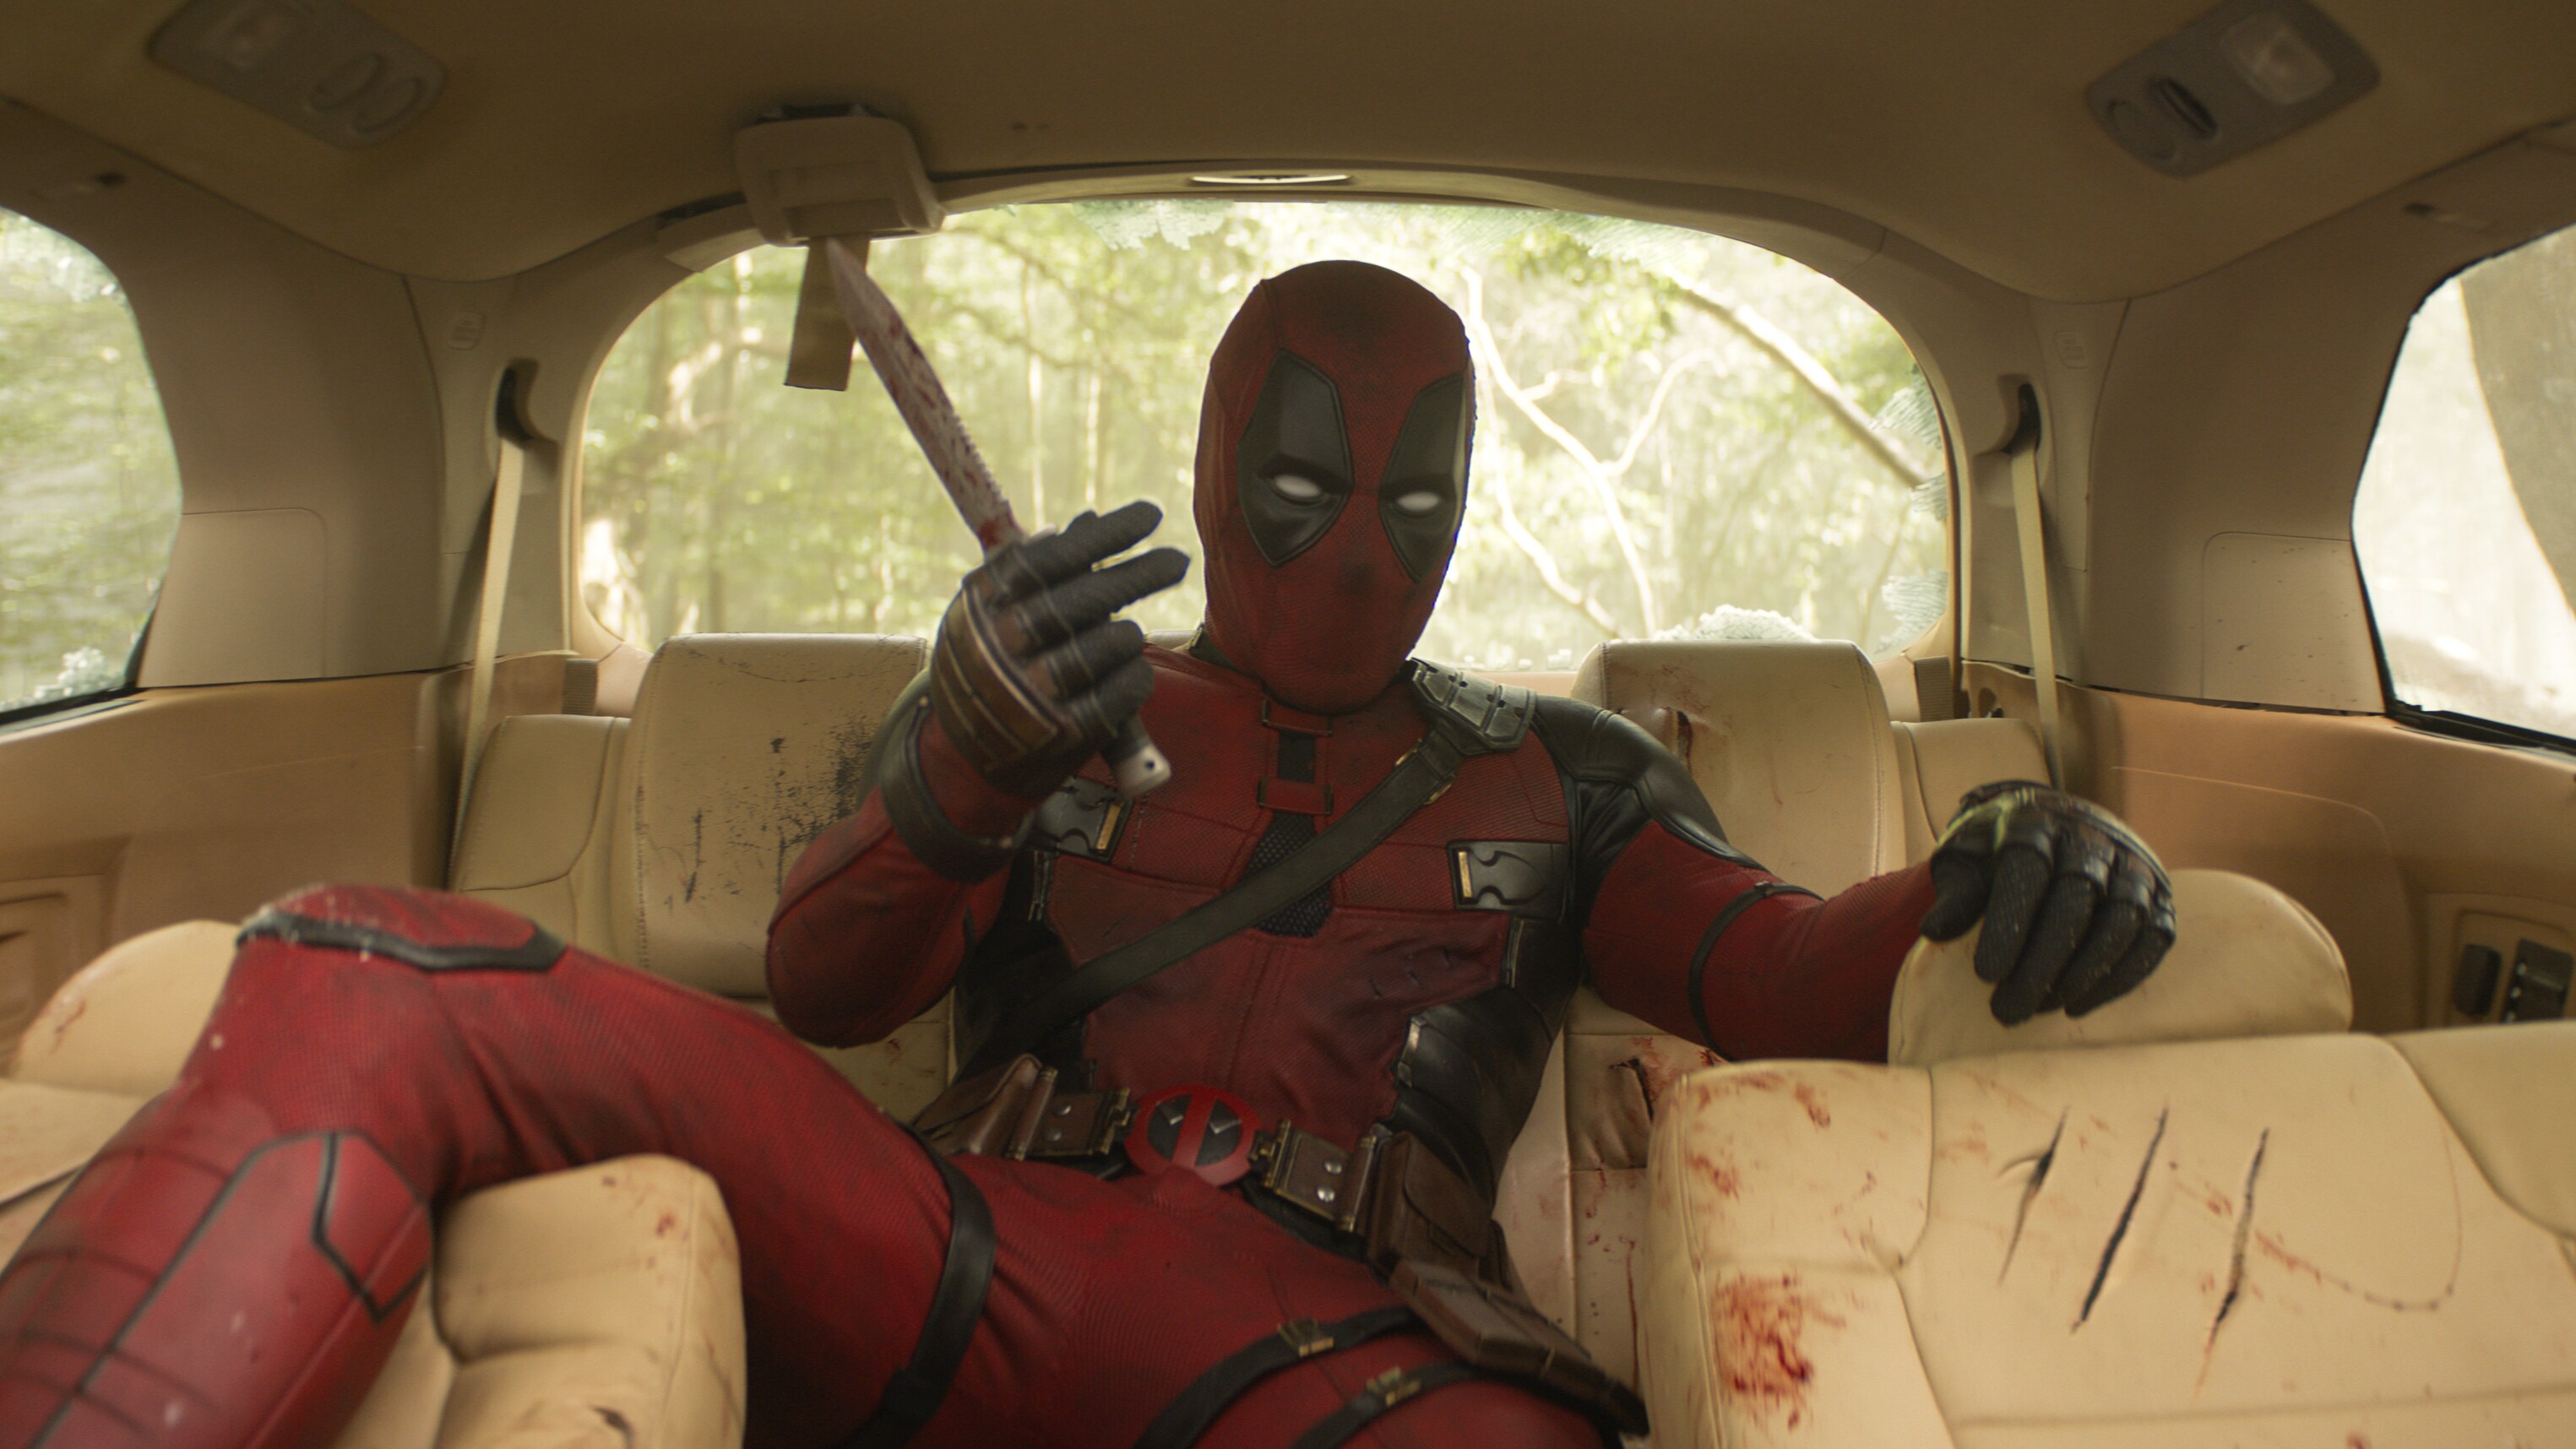 Deadpool aka Wade Wilson (actor Ryan Reynolds) sitting in the backseat of a car holding a weapon from the film "Marvel Studios' Deadpool & Wolverine".